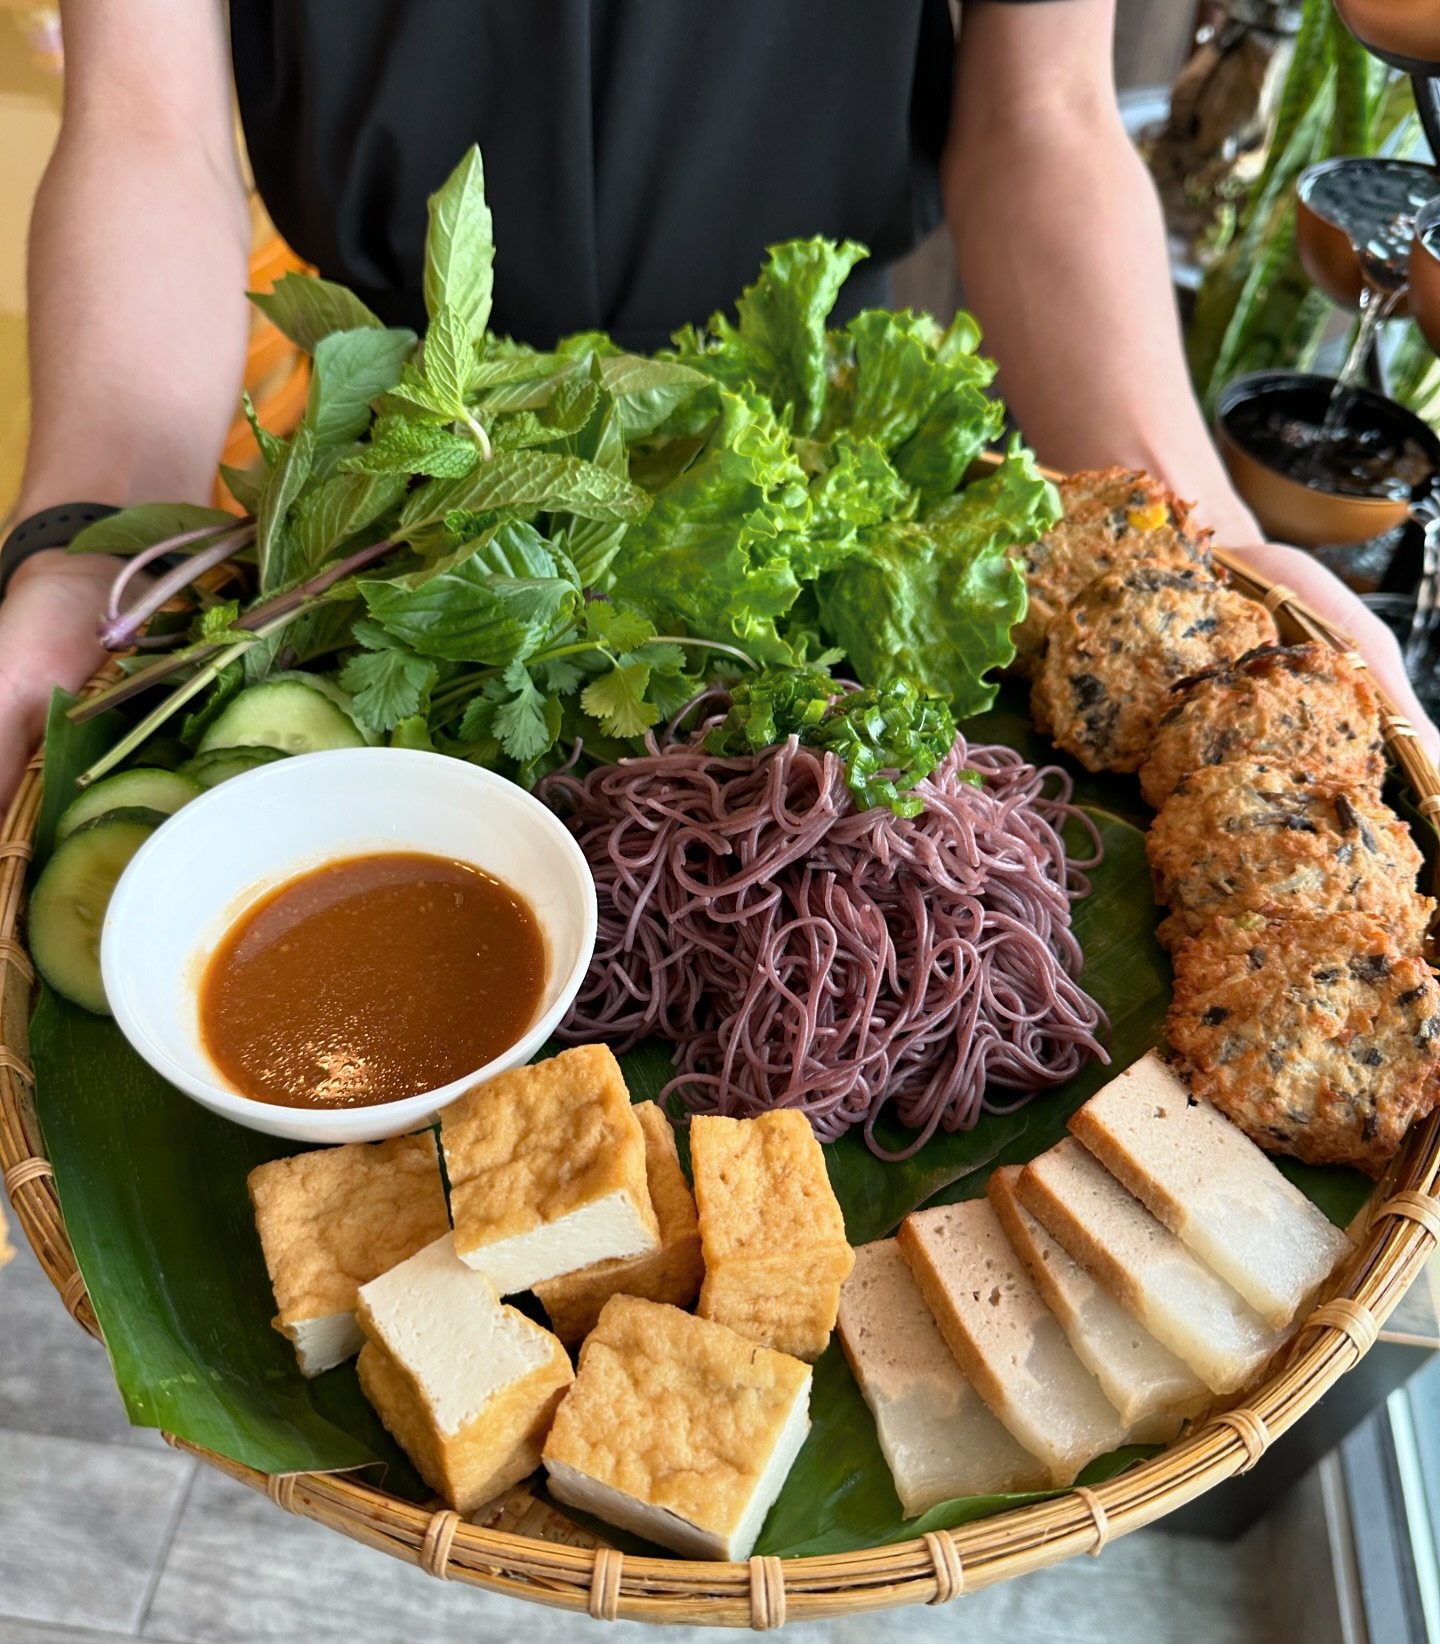 Our chefs specialty platters are the perfect spring dish! Chay&rsquo;s Vegetarian Vermicelli Platter features a trio of fried vegan patty, fried tofu &amp; vegetarian ham surrounding a bed of brown rice vermicelli. An assortment of fresh herbs, lettu